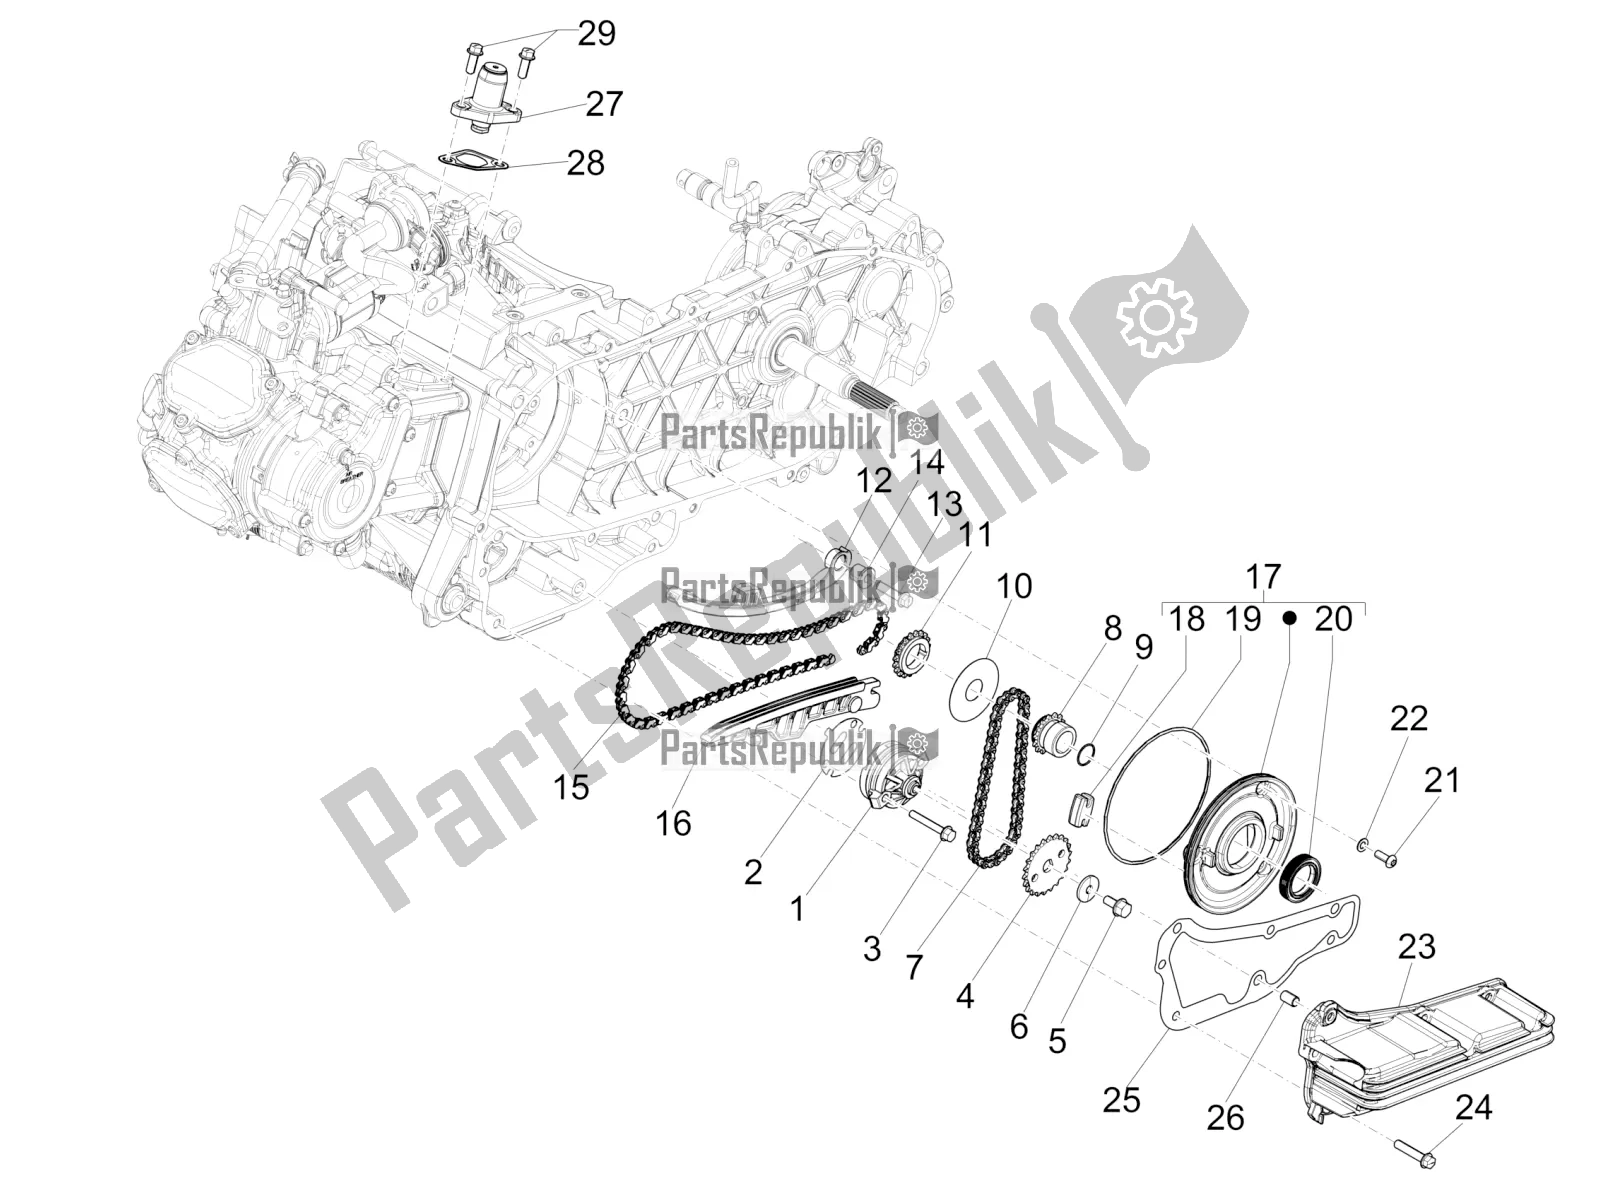 All parts for the Oil Pump of the Vespa GTS 150 Super-Super Sport ABS Apac 2021